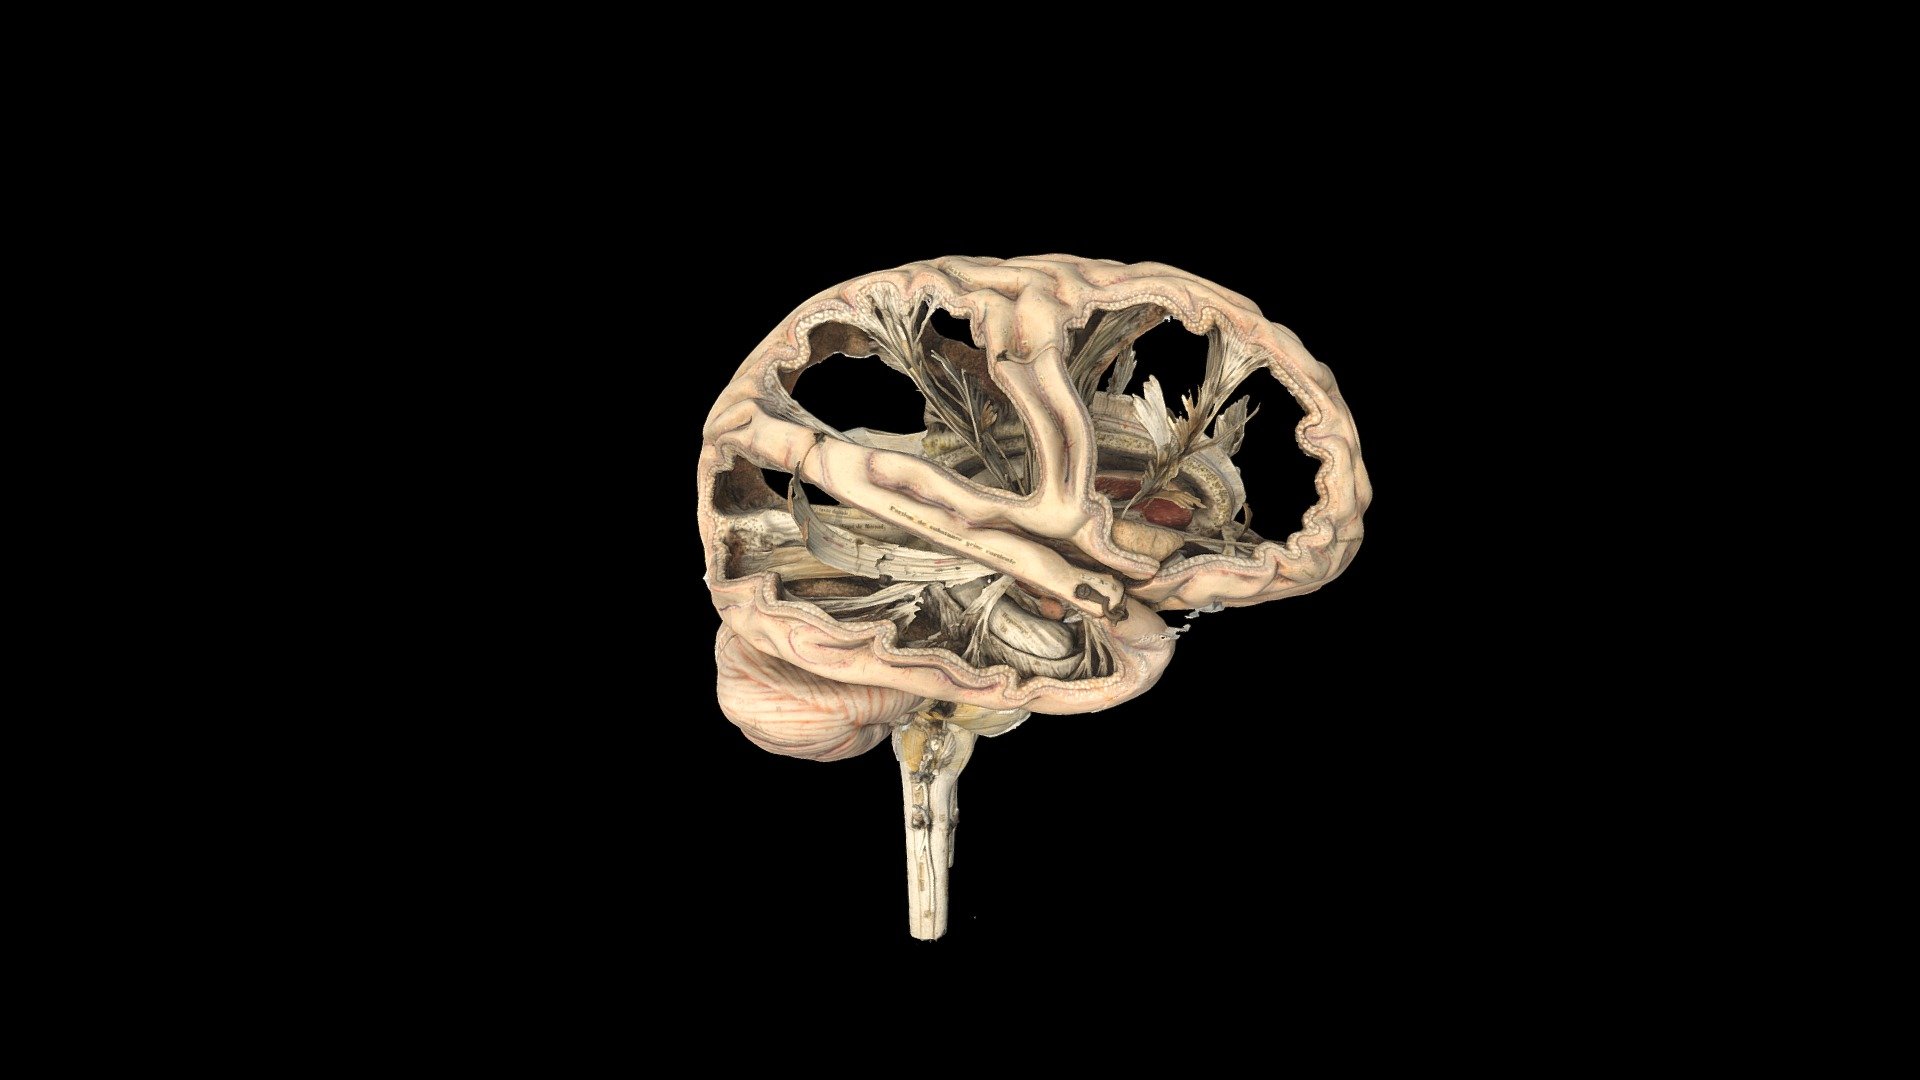 model-of-a-human-brain-download-free-3d-model-by-science-museum-group